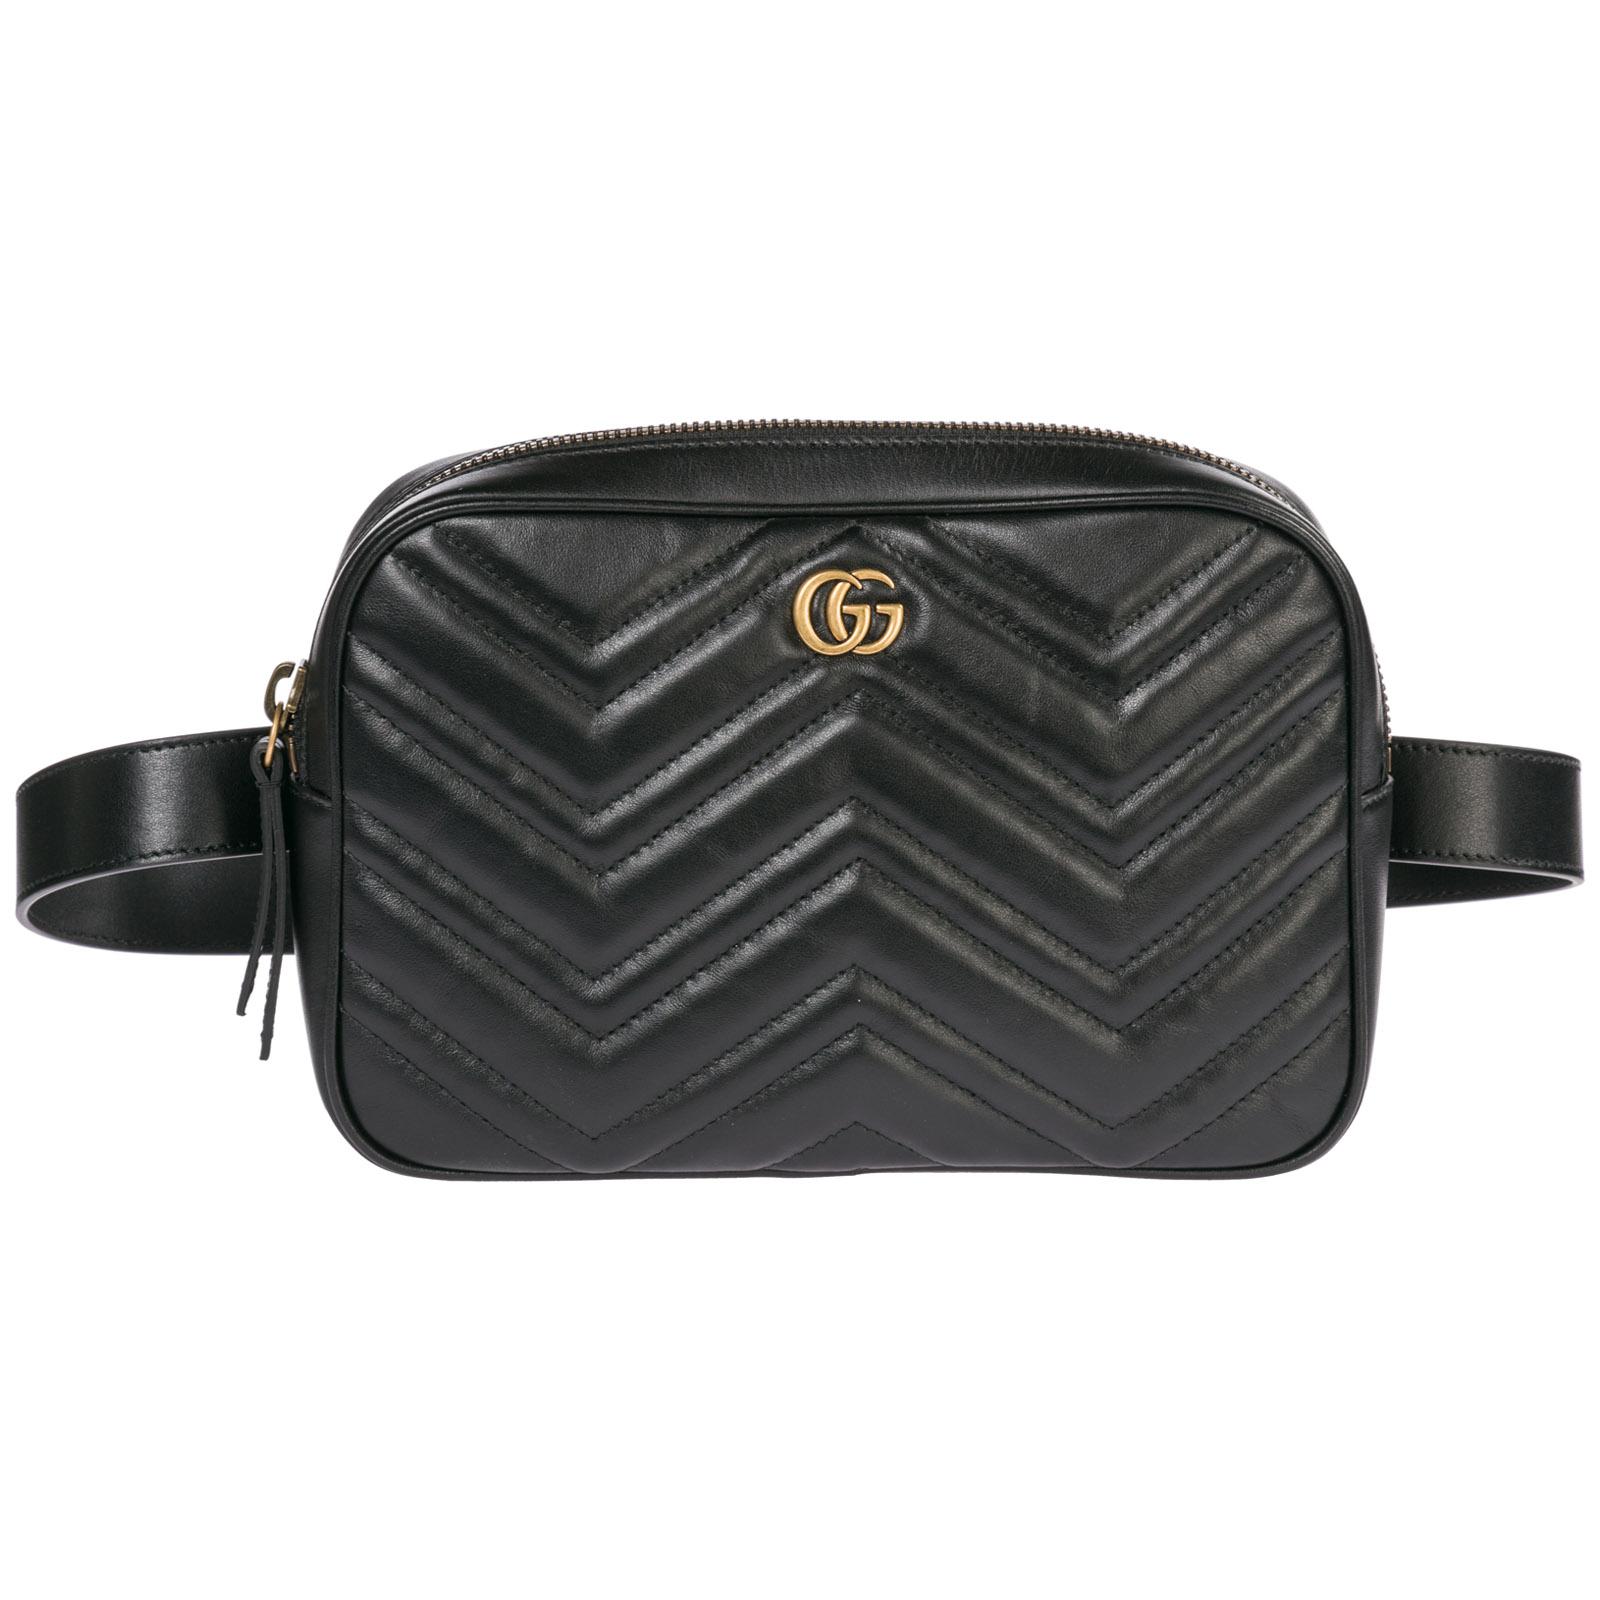 Gucci Leather Belt Bum Bag Hip Pouch gg Marmont in Black for Men - Lyst